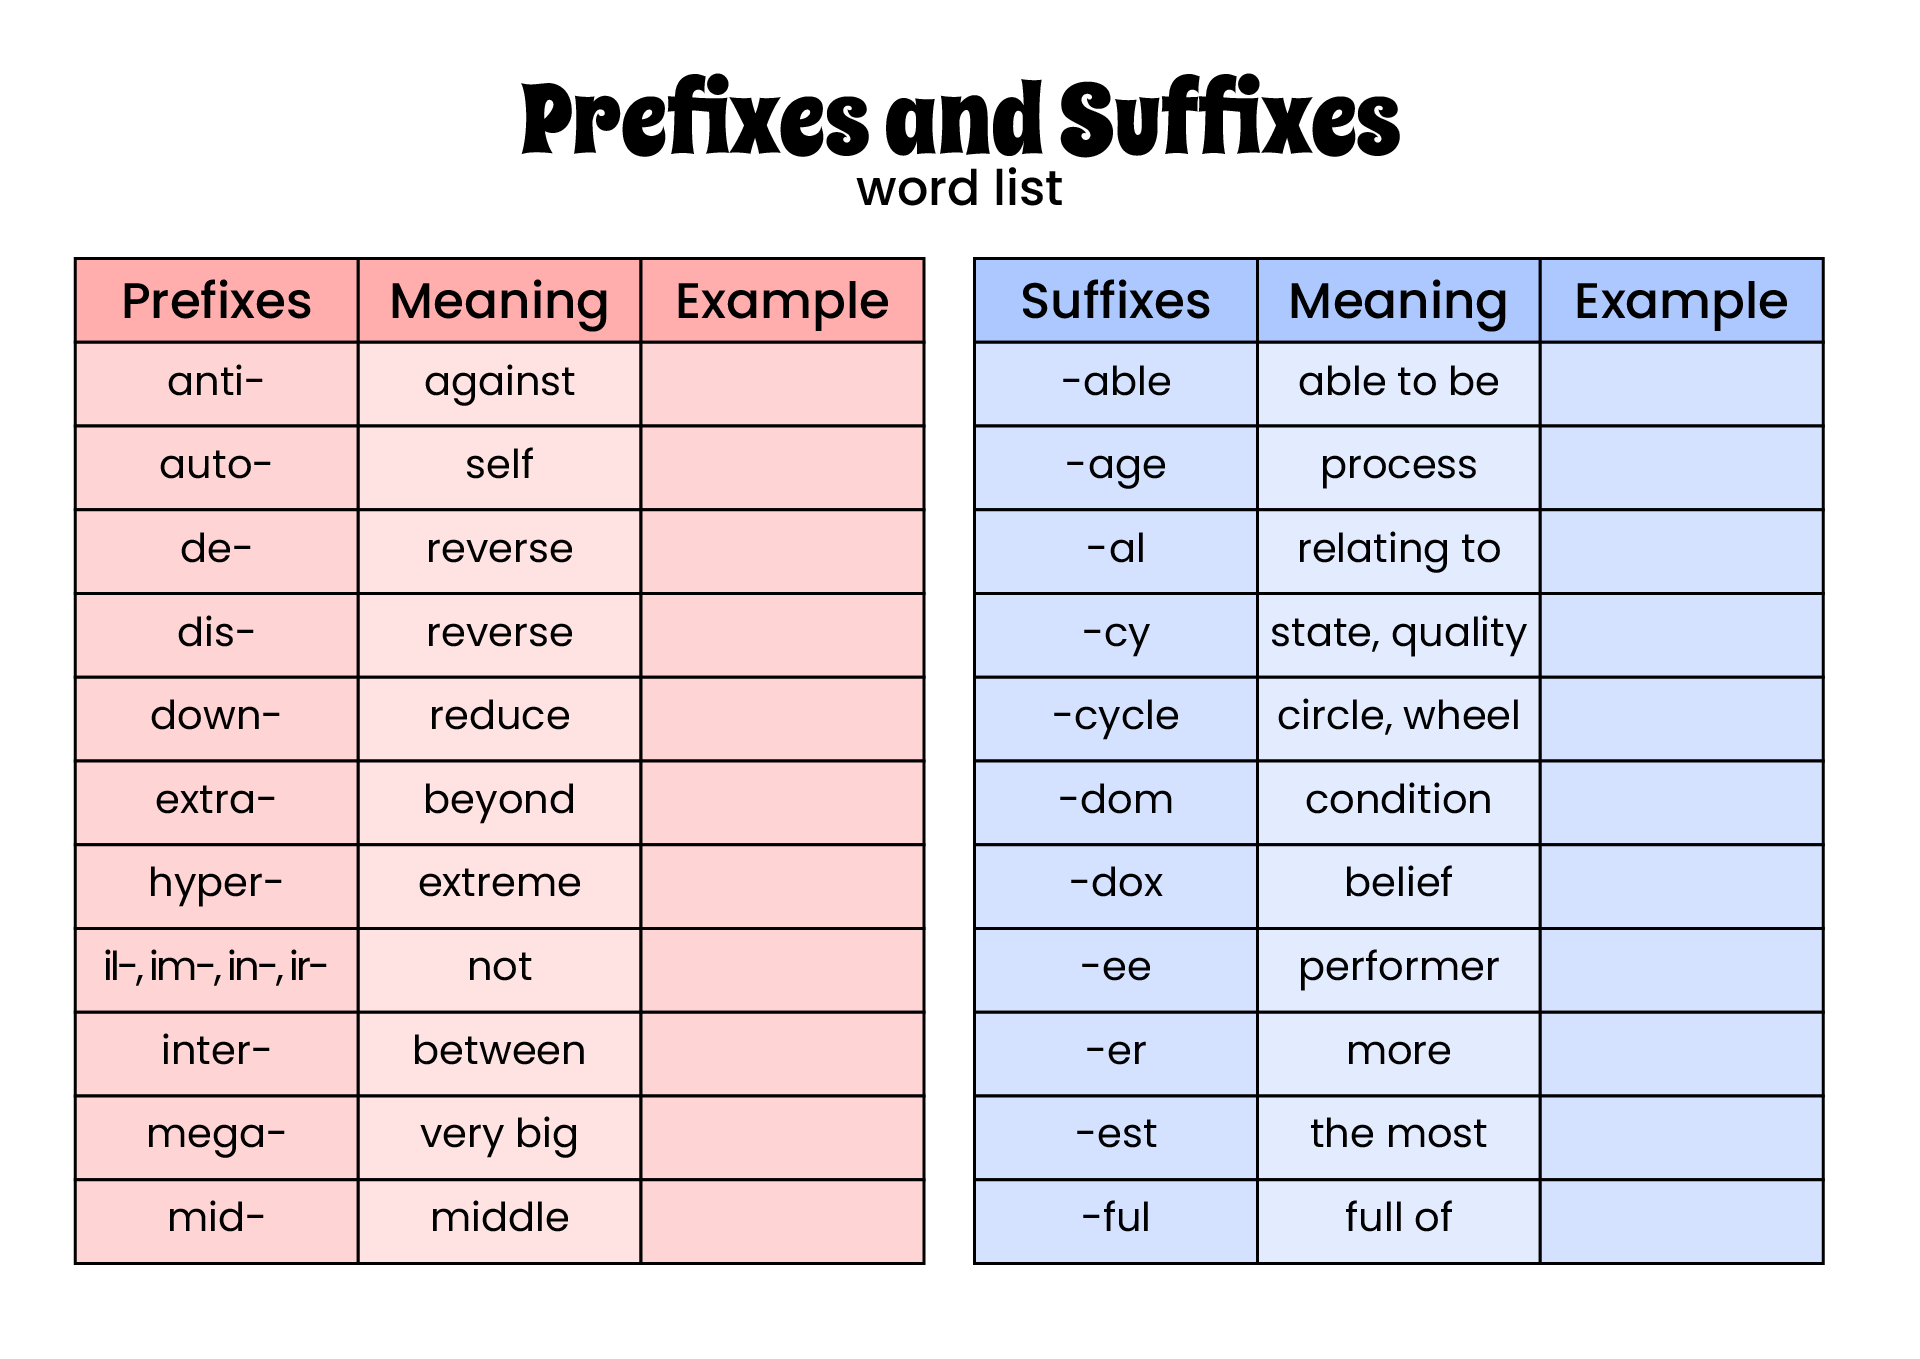 Prefix and Suffix Word List Image